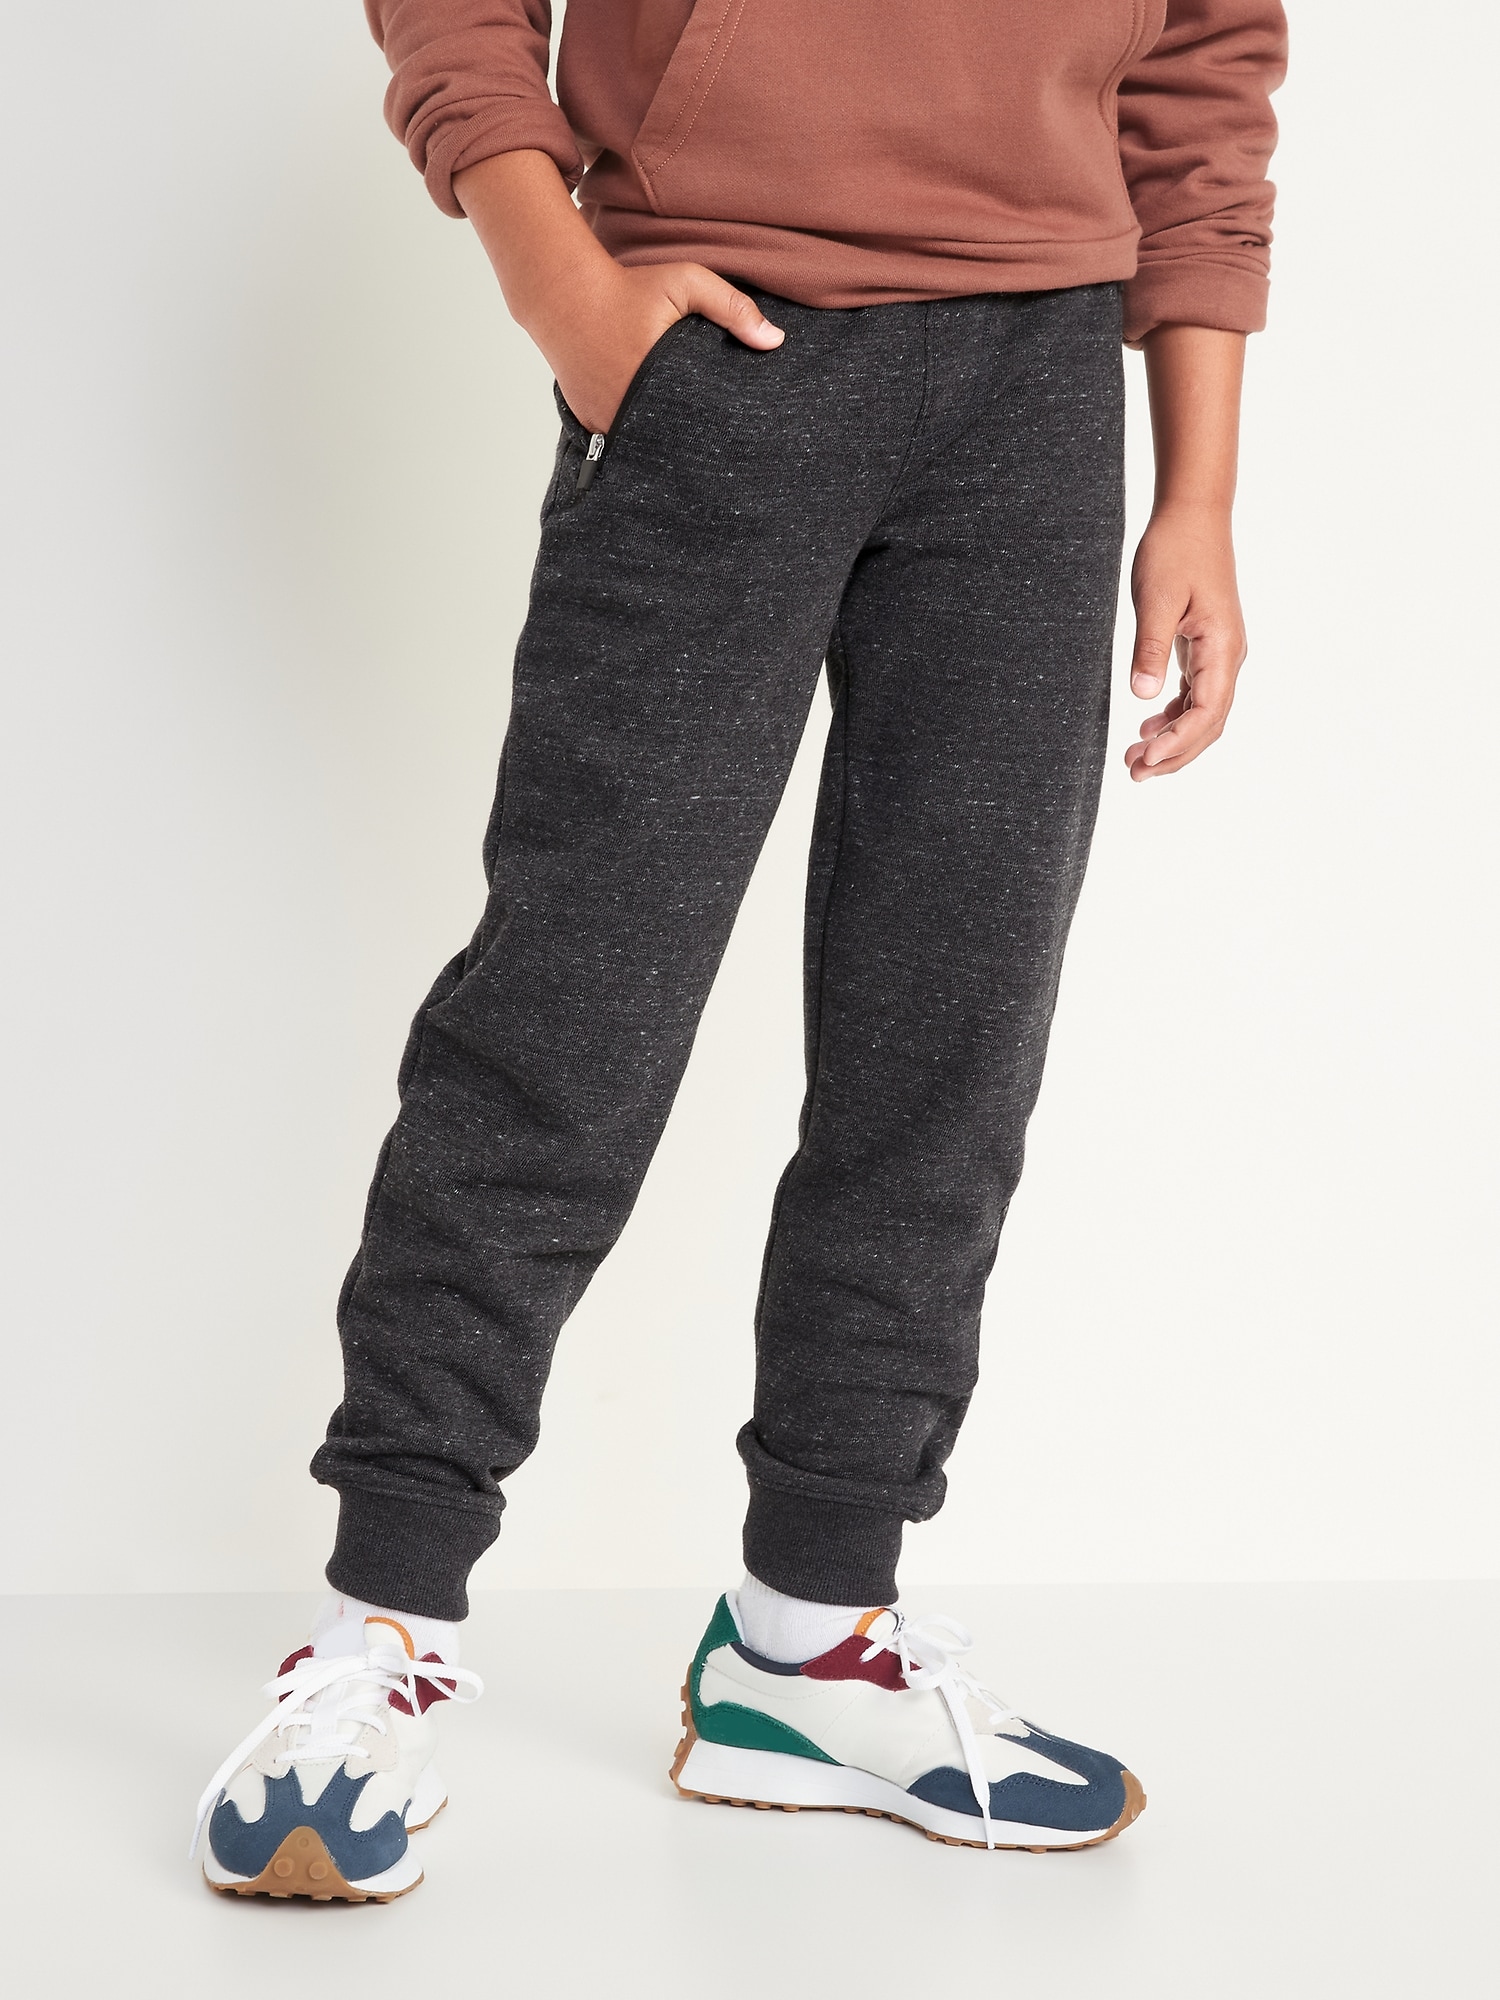 Mens Cozy-Fit Stretch Lounge Jogger Pant Drawstring Cuffed